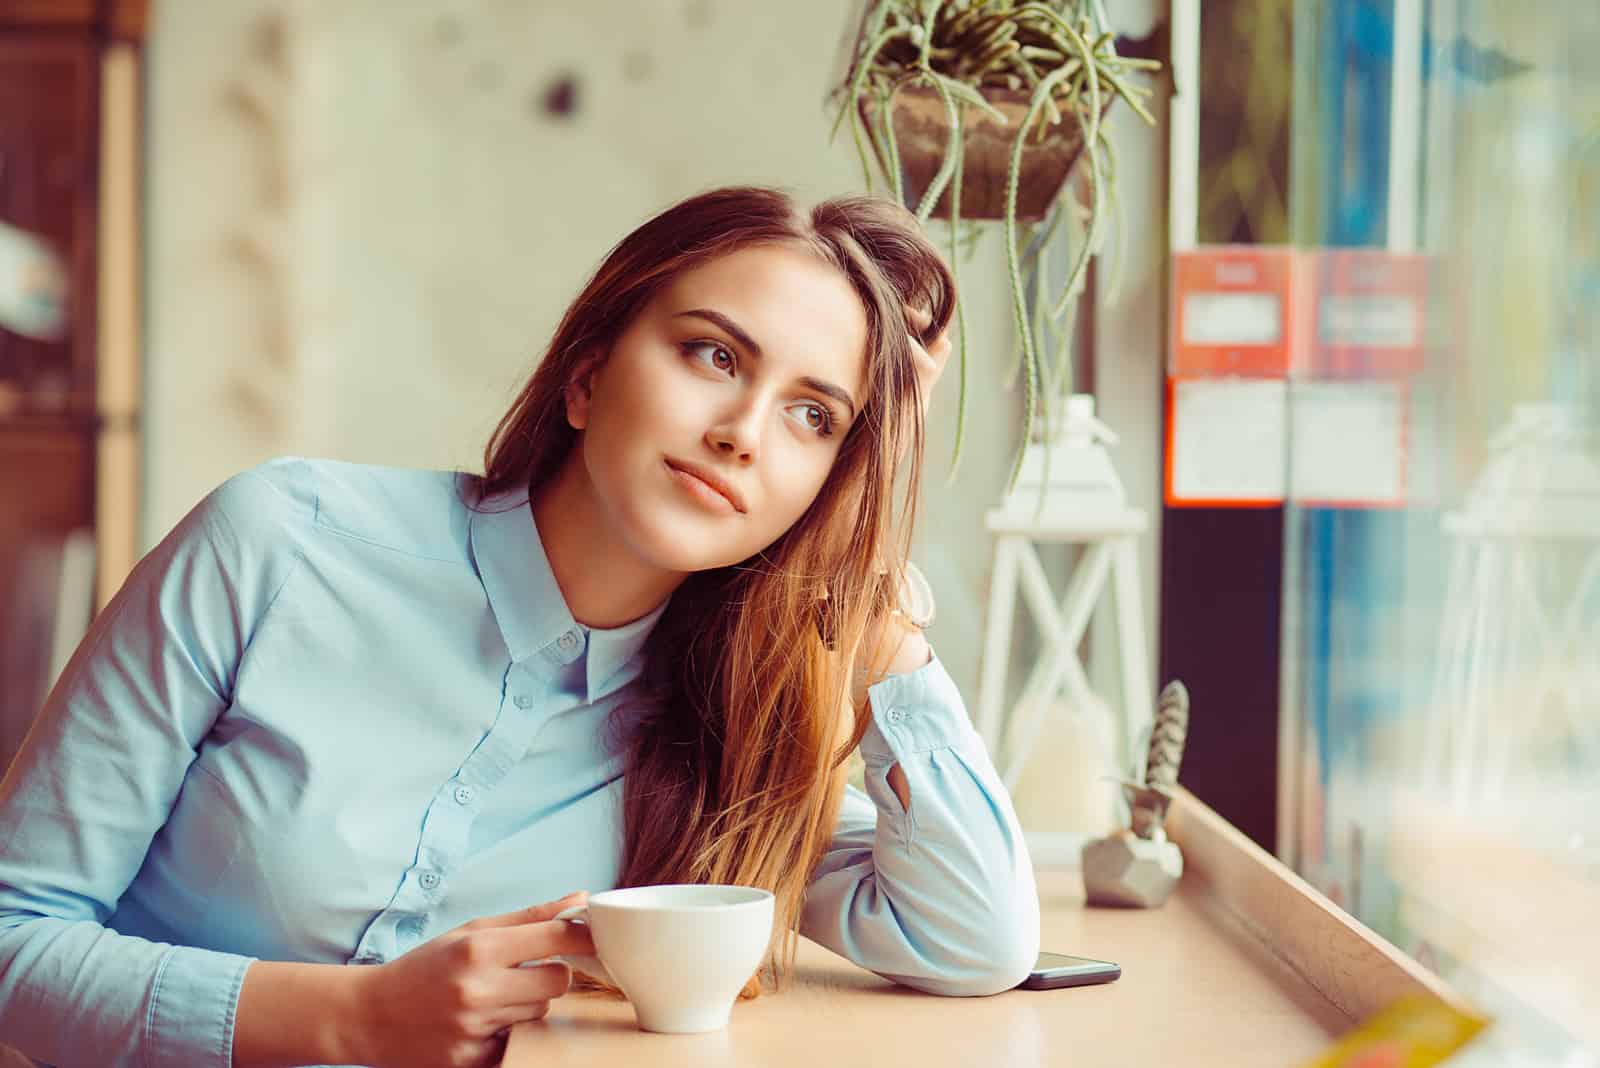 an imaginary brown-haired woman sits and drinks coffee